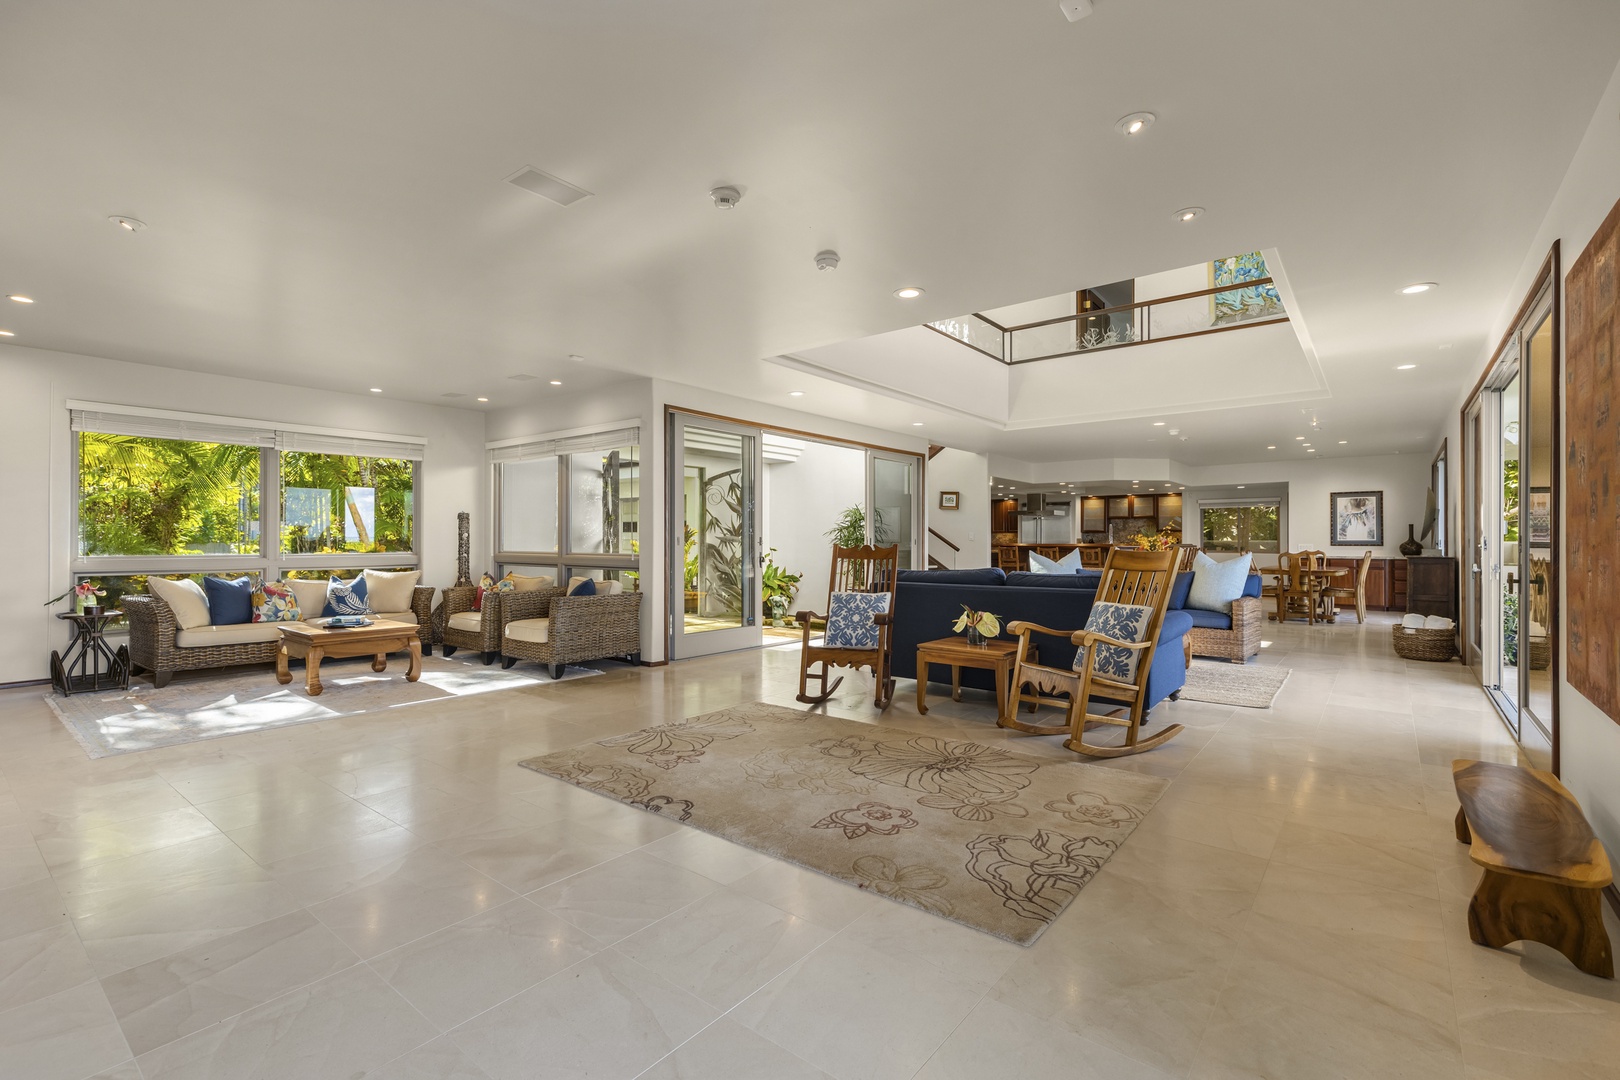 Kailua Vacation Rentals, Mokulua Sunrise - A sitting area situated under the central landing is a great place to enjoy the energy of the house, as the views of the ocean outside and comfortably cushioned seating entice you to relax.